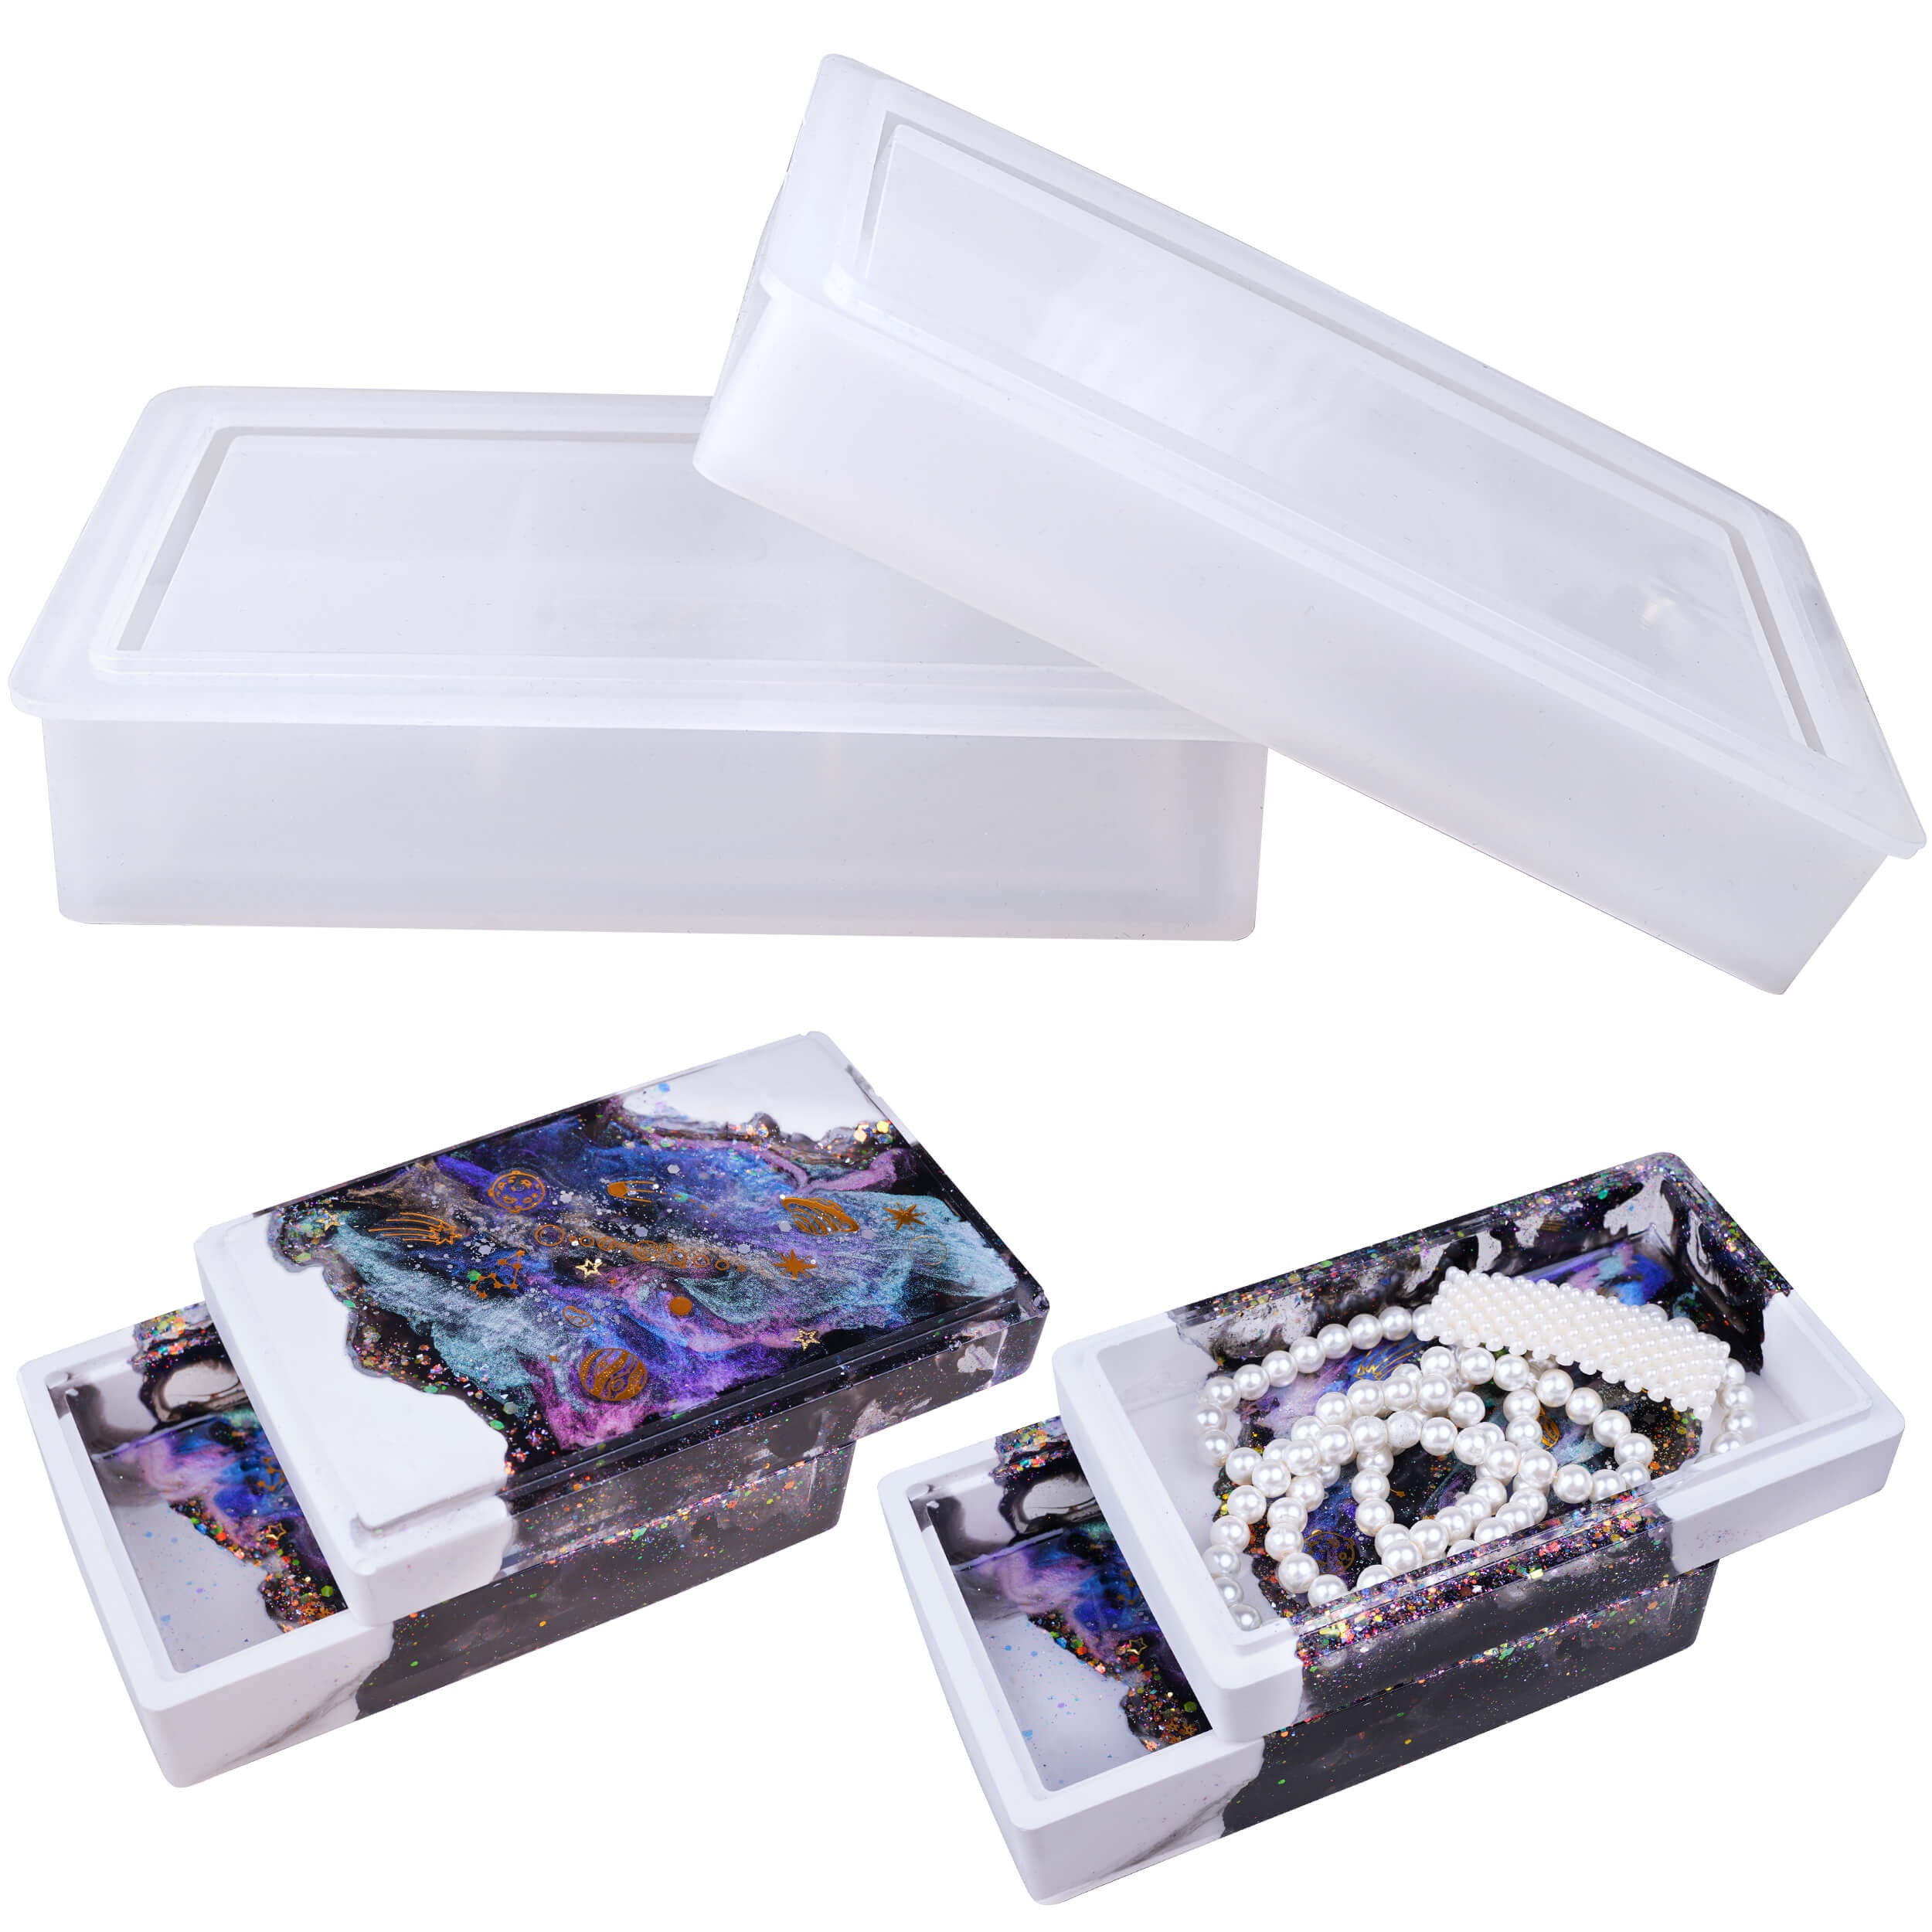  LET'S RESIN Resin Molds Silicone Kit for Making Domino